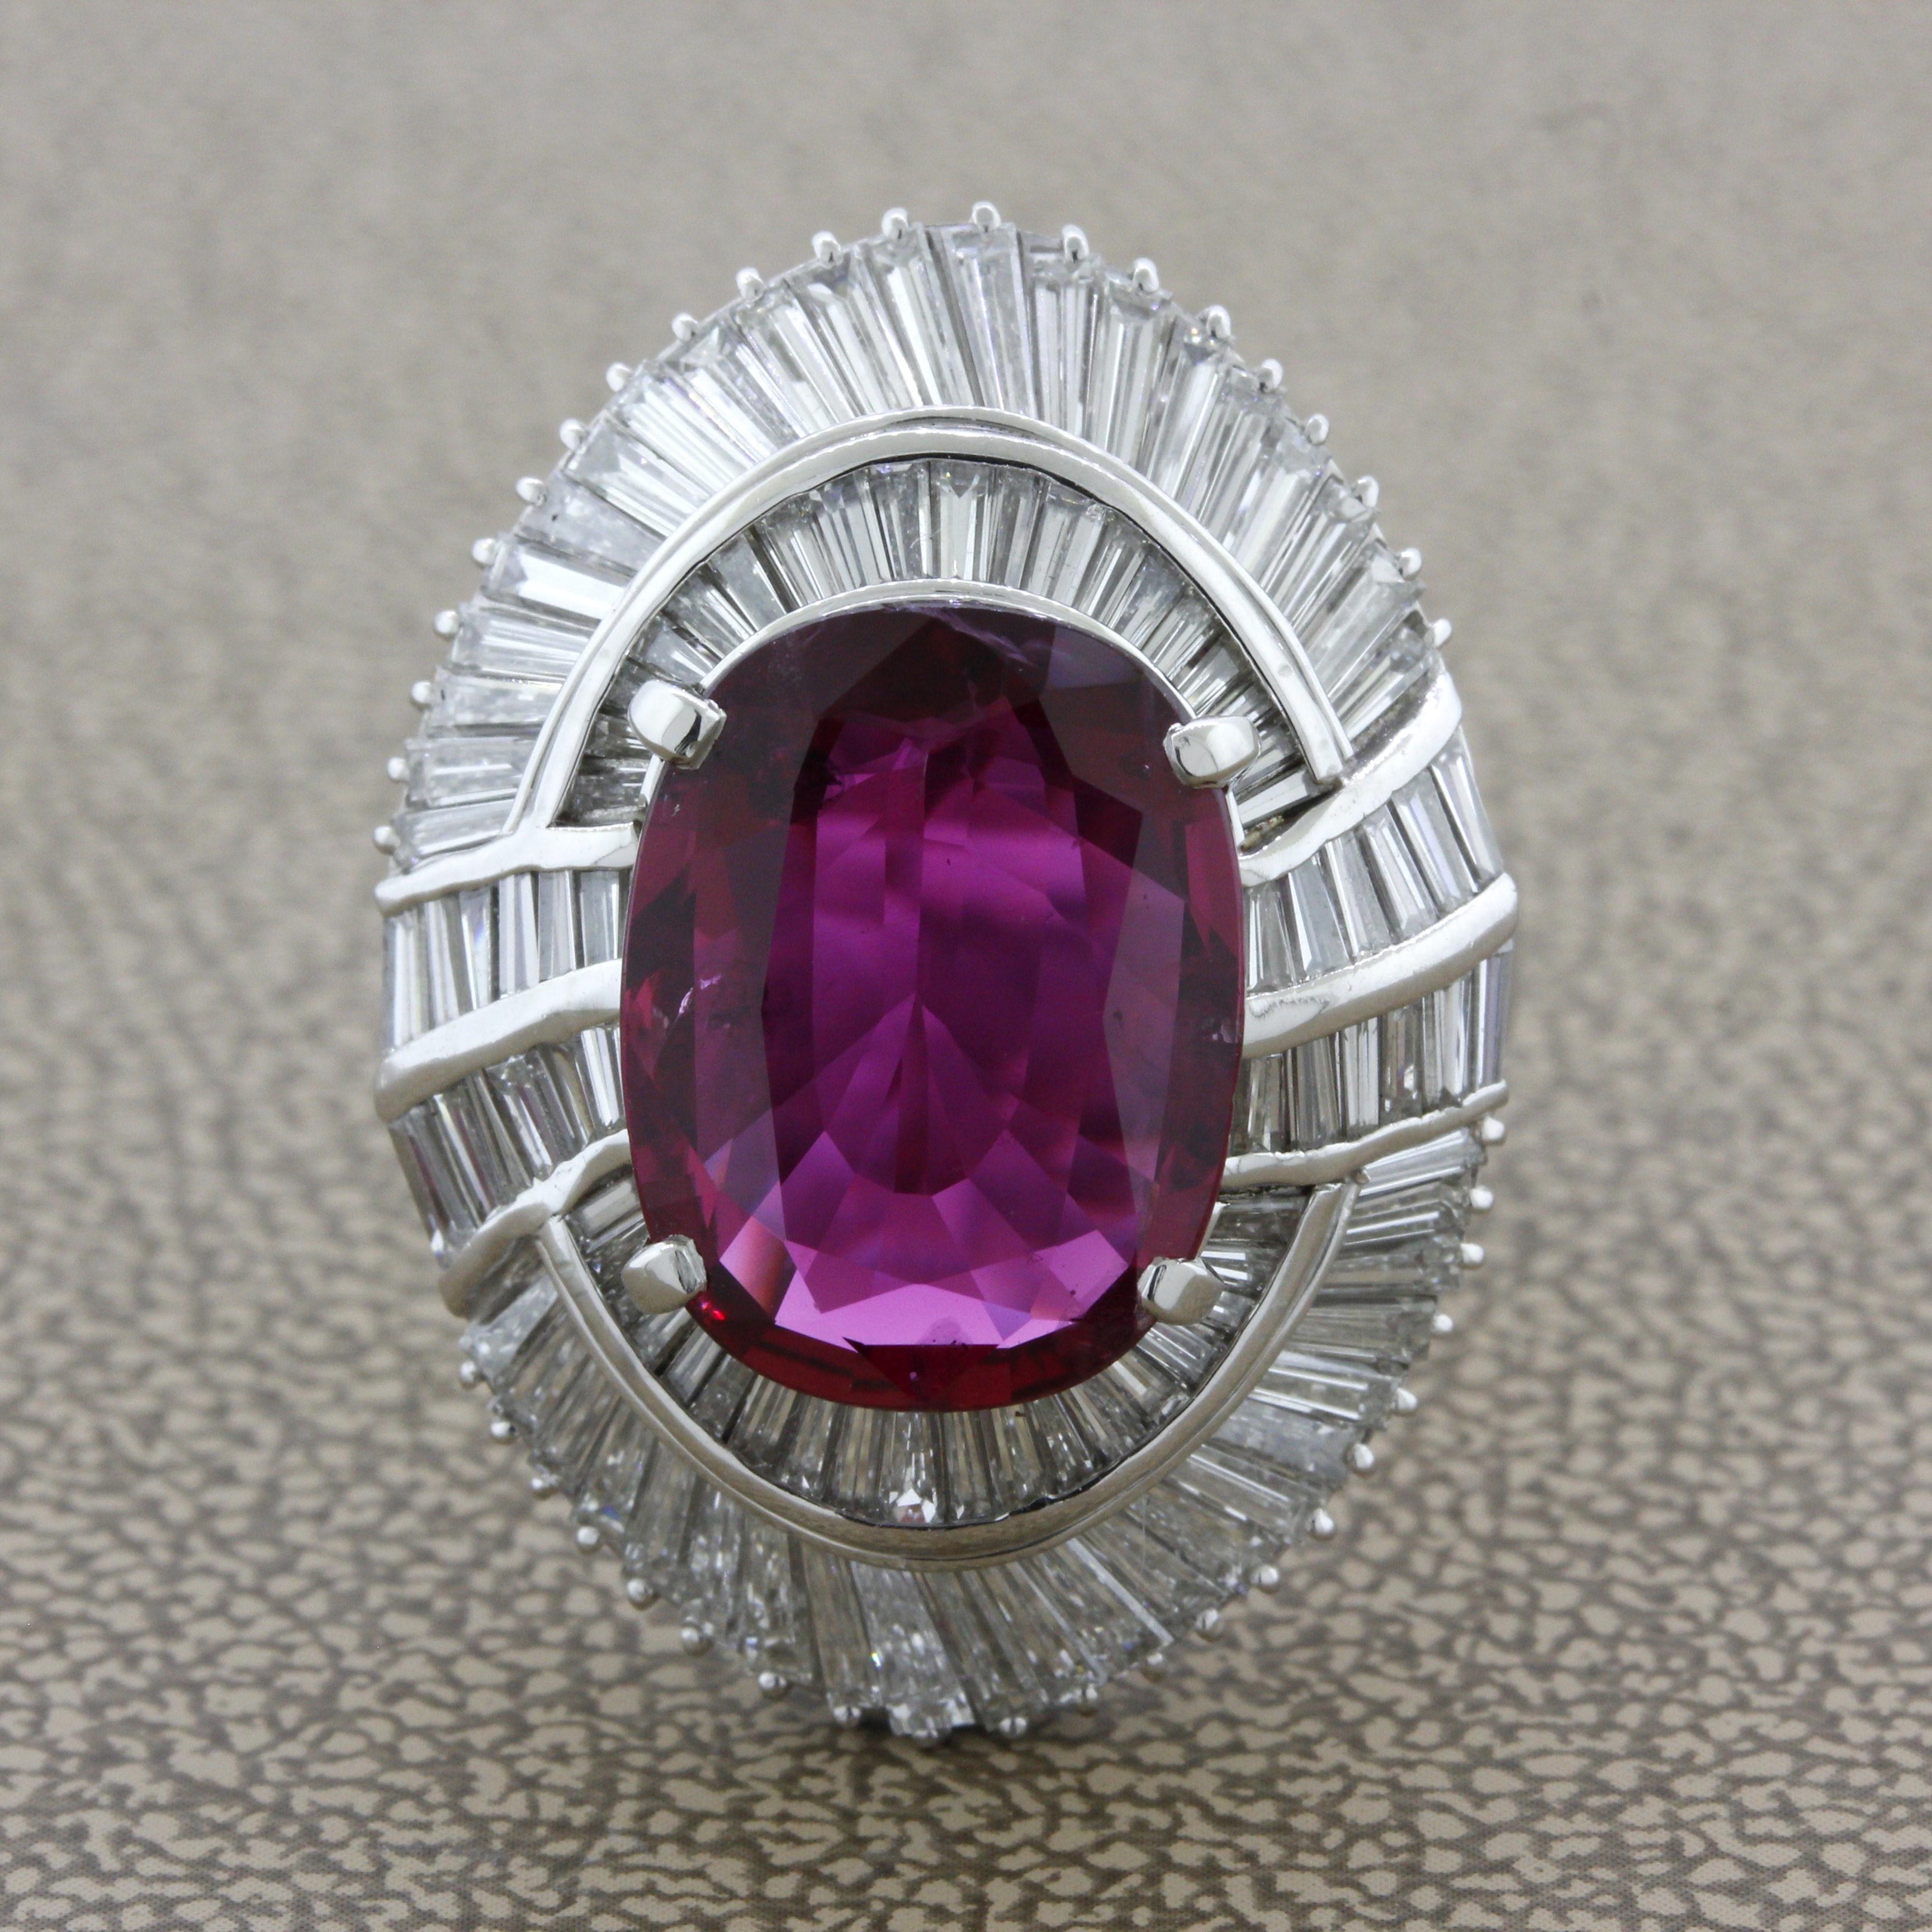 A large and impressive gem ruby takes center stage! It weighs 6.36 carats but looks like an 8 or 9 carat stone based on its proportions and spread. It has a bright gemmy red color with a clean and vibrant crystal. Certified by the AGL as natural and